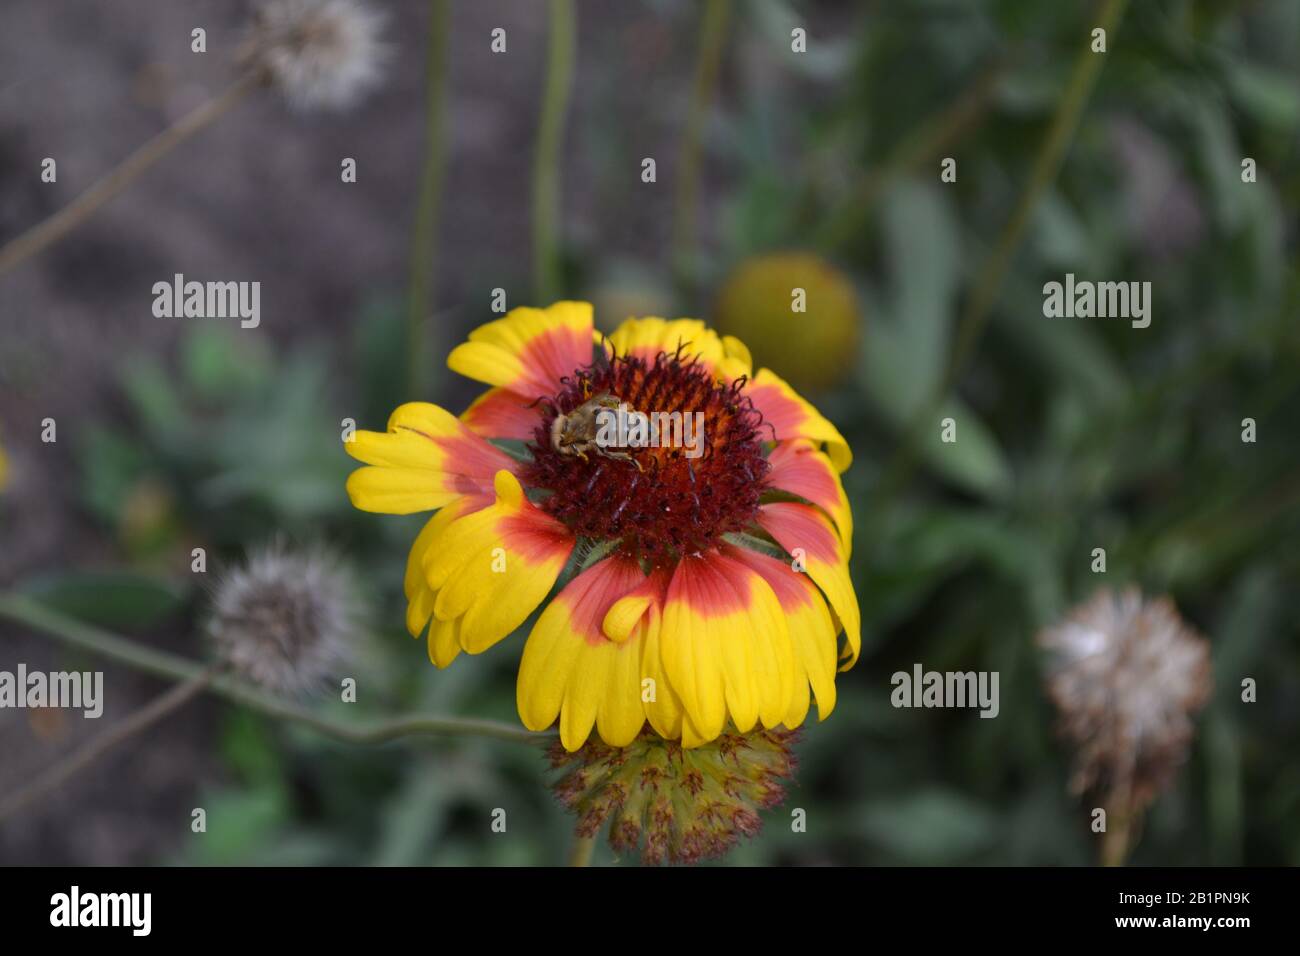 Gaillardia. G. hybrida Fanfare. A bee on a flower. Summer days. Flowerbed with flowers. Green leaves. Bright yellow flowers. Unusual petals. Horizonta Stock Photo